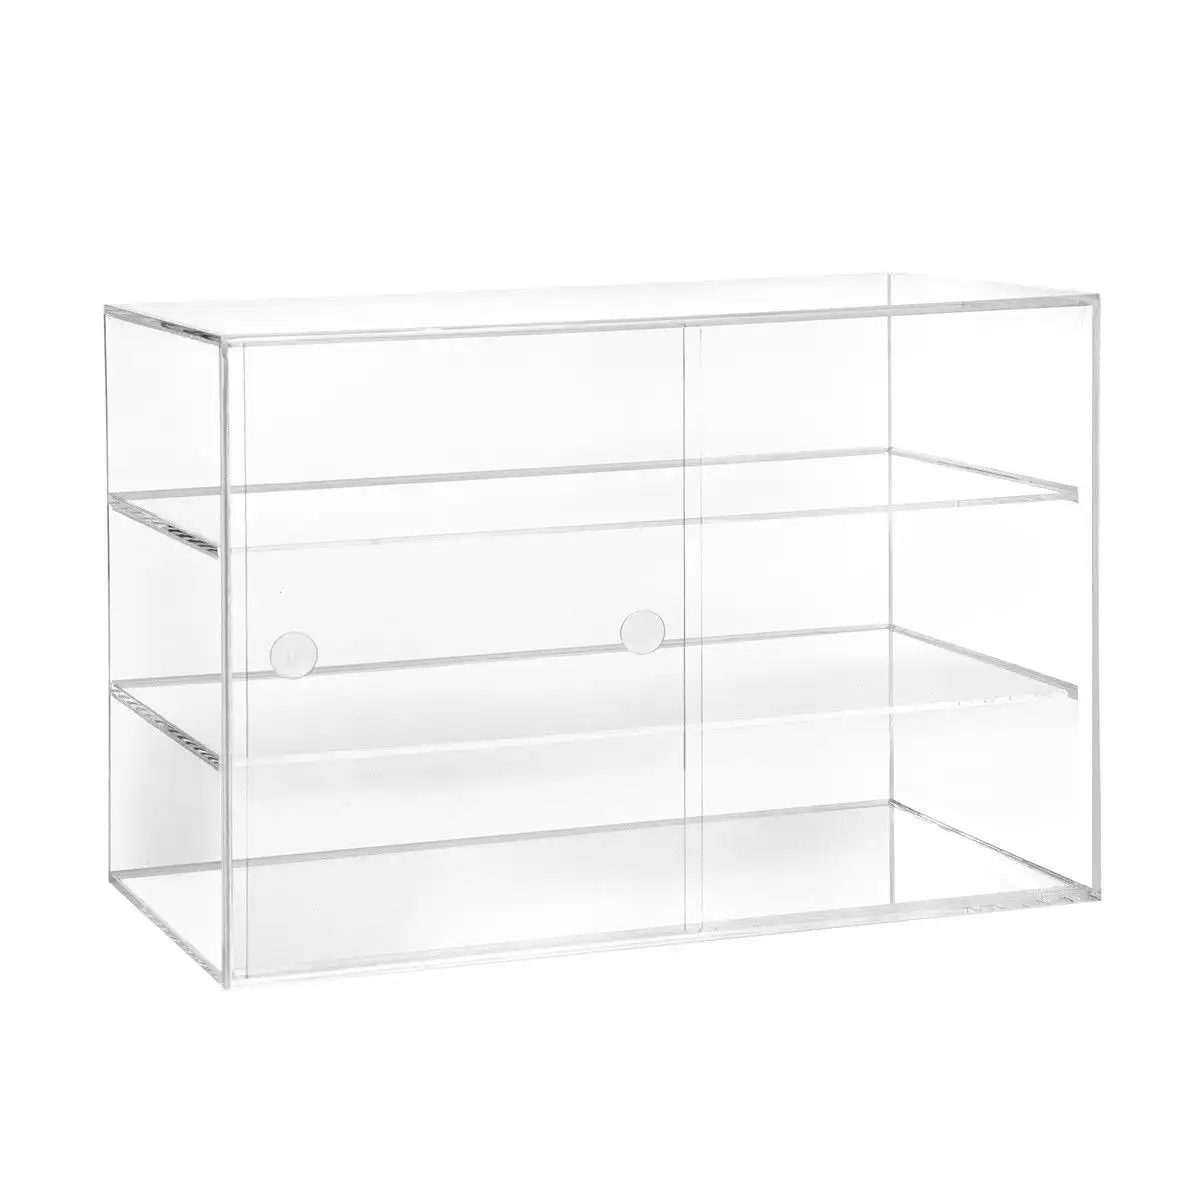 Ausway Acrylic Bakery Cake Display Cabinet Donuts Cupcake Pastries 3-Tier Large 5mm Thick